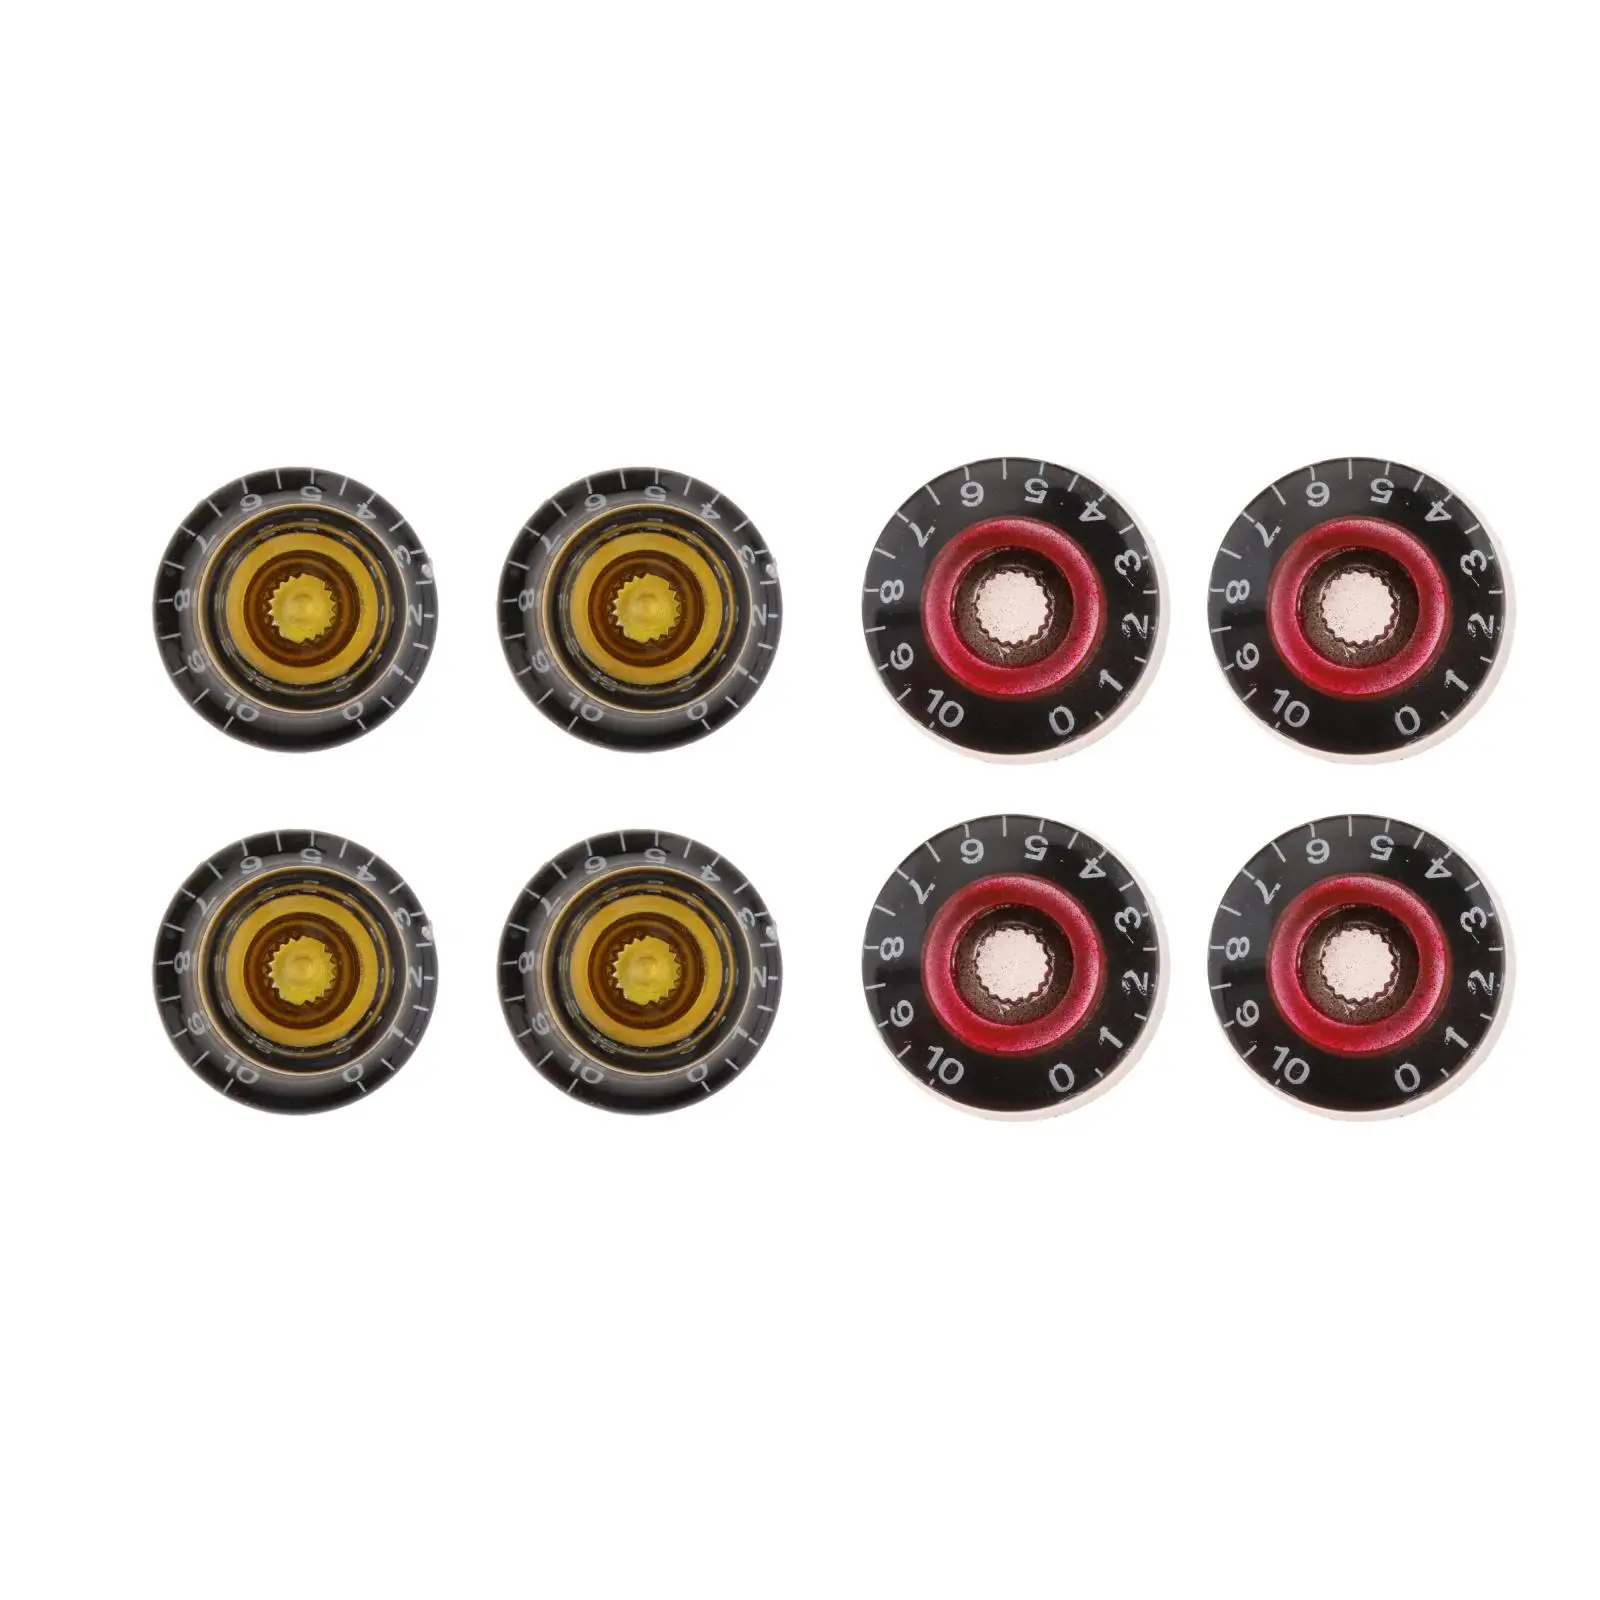 Resin Electric Guitar Tone and Volume Control Knobs w/ Number Top Hat for  Guitar Old Broken Part Accs